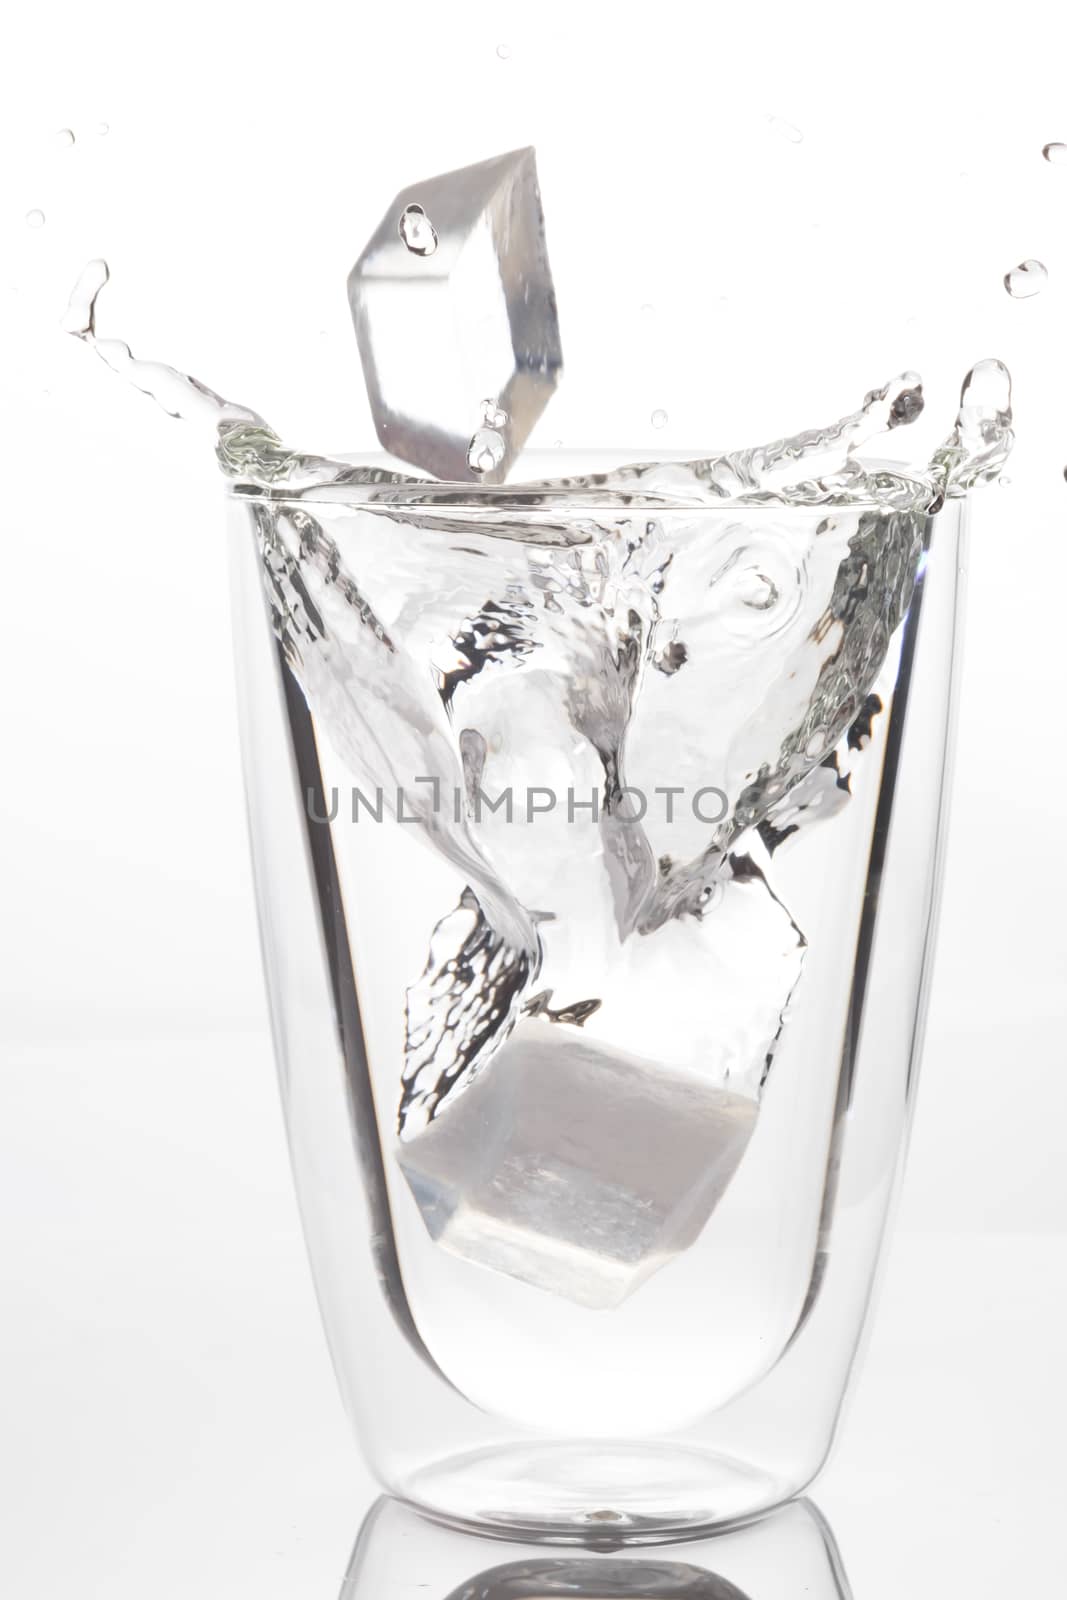 Ice drop to glass of drinking water by zneb076